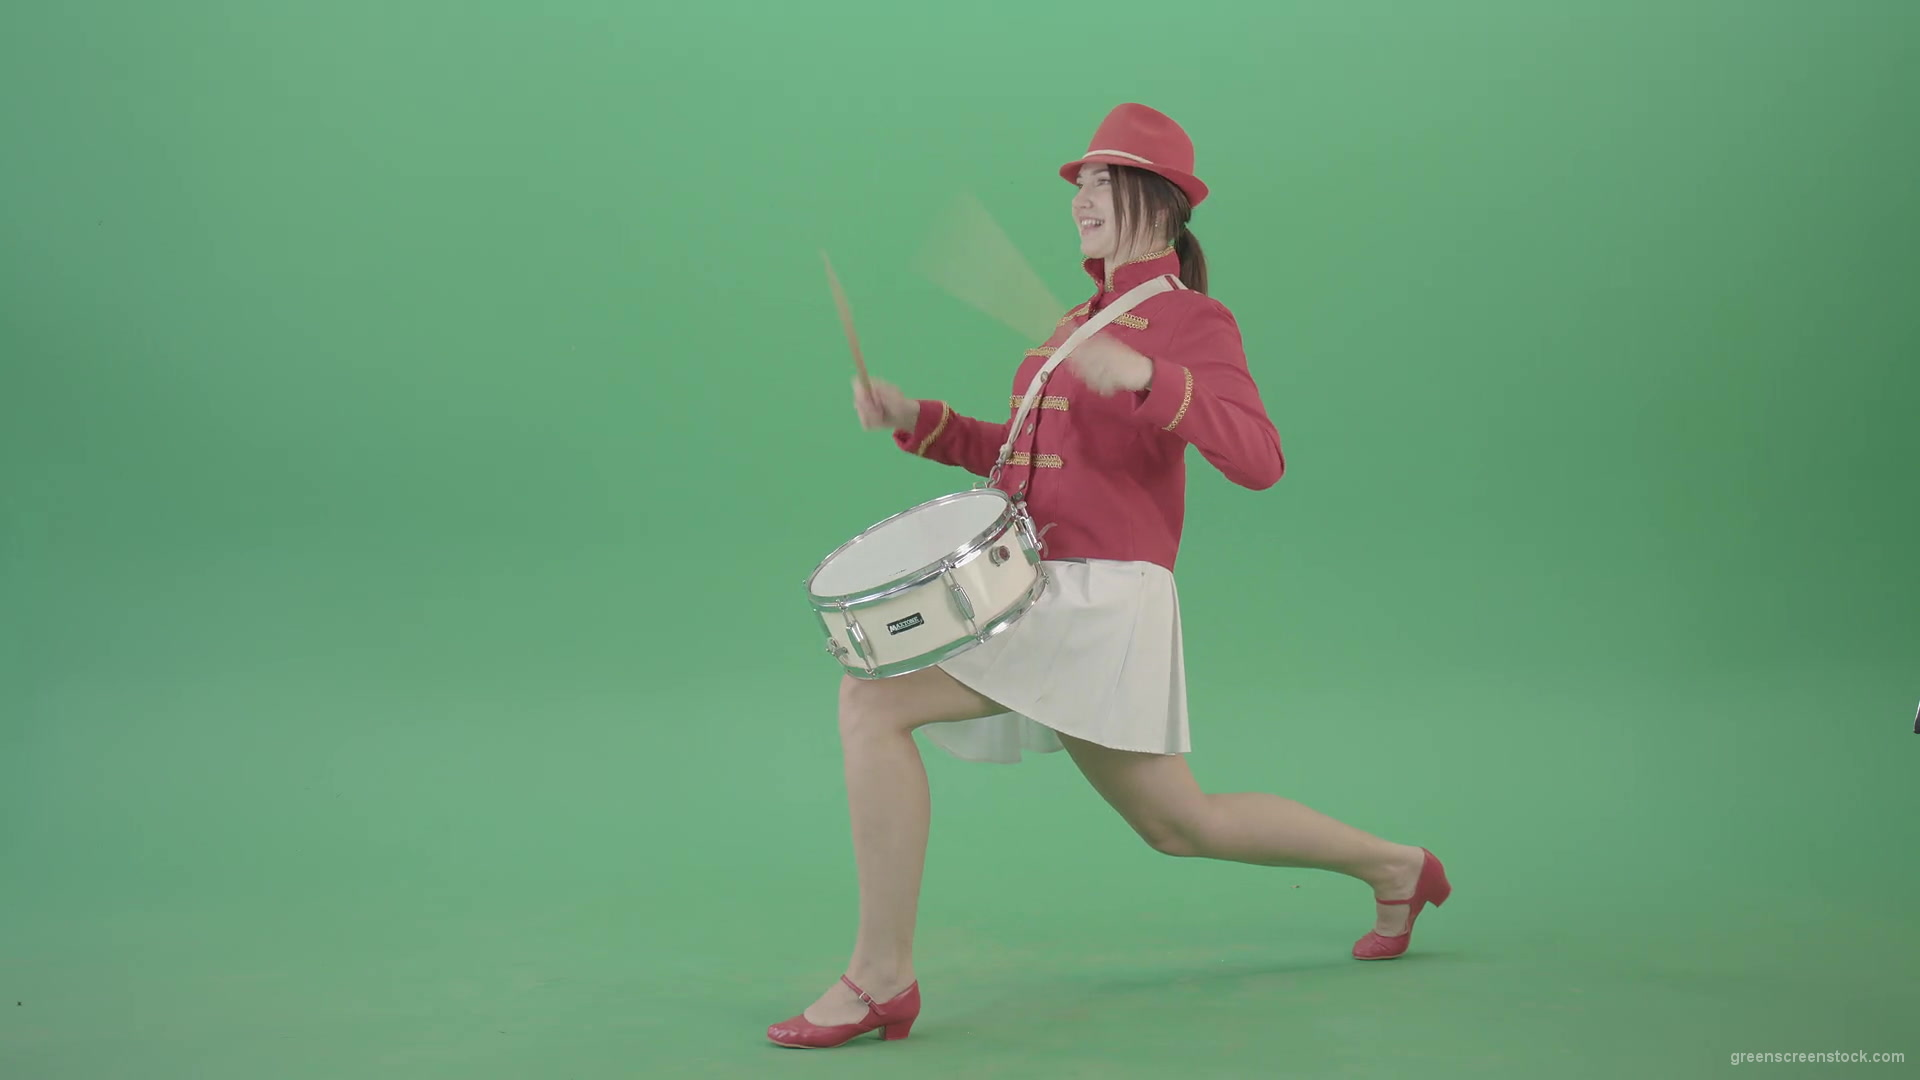 Stupid-funny-advertising-video-footage-with-drumming-girl-isolated-on-green-screen-4K-Video-Footage-1920_002 Green Screen Stock